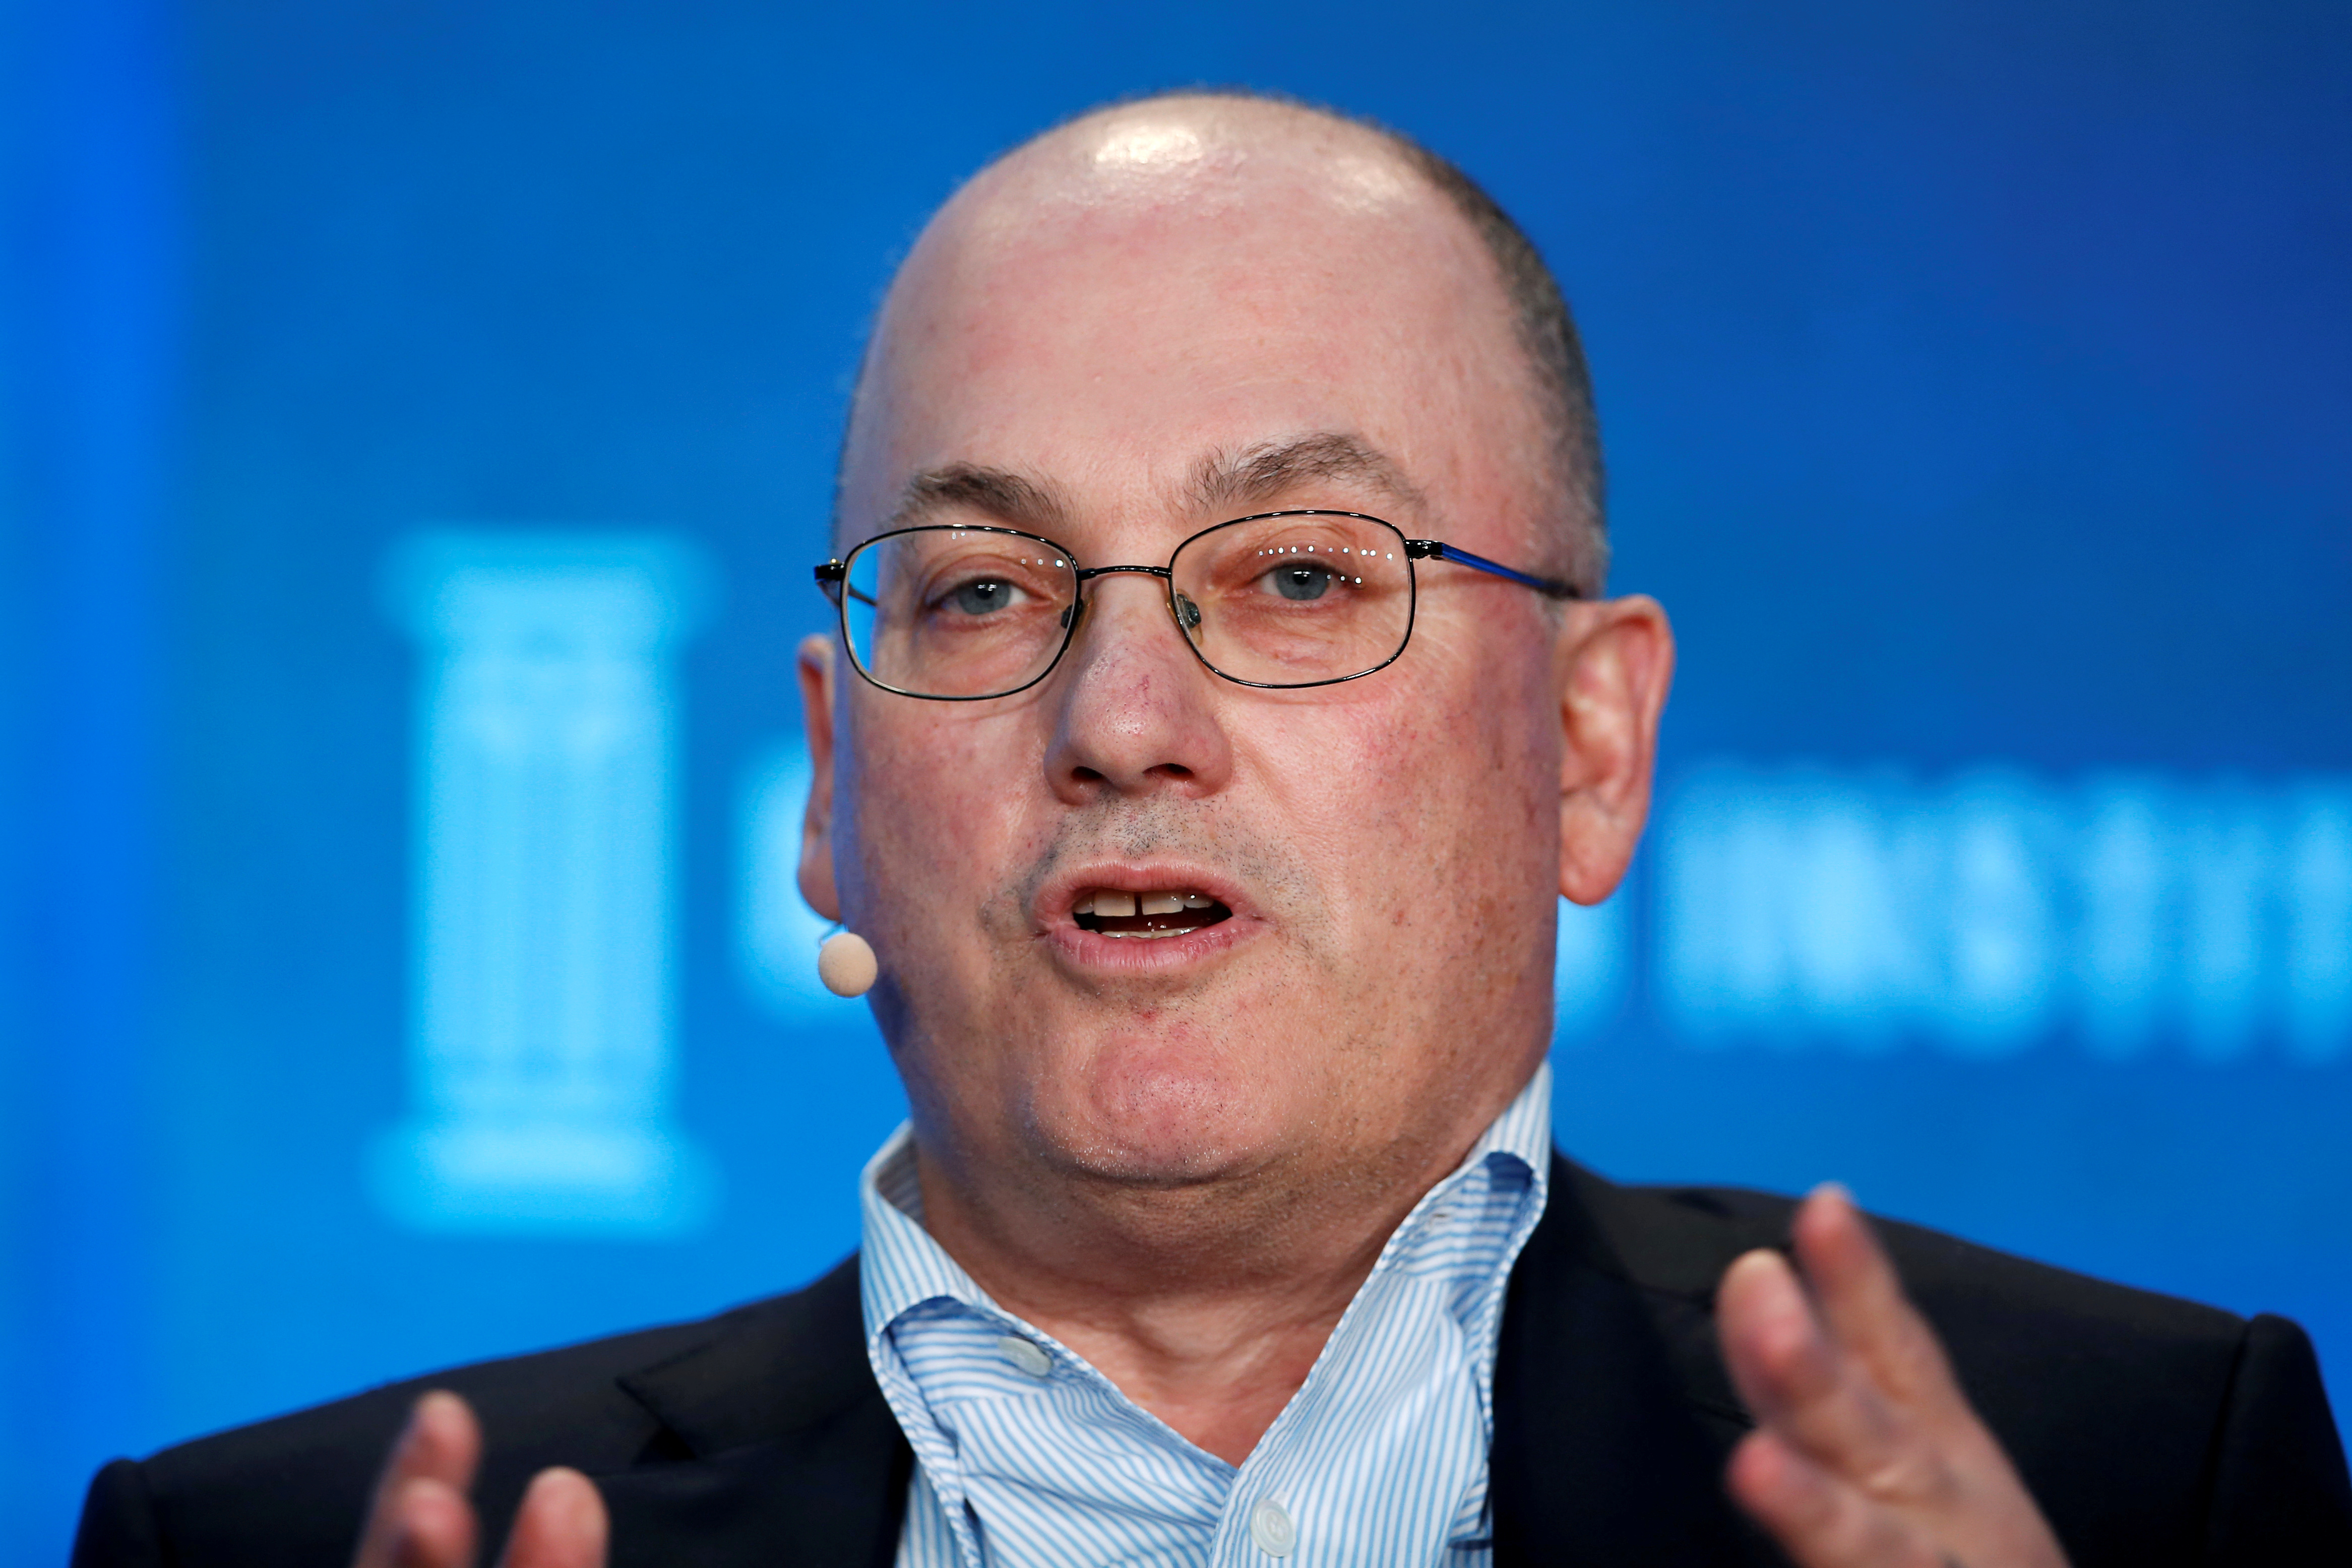 Steven Cohen, Chairman and CEO of Point72 Asset Management, speaks at the Milken Institute Global Conference in Beverly Hills